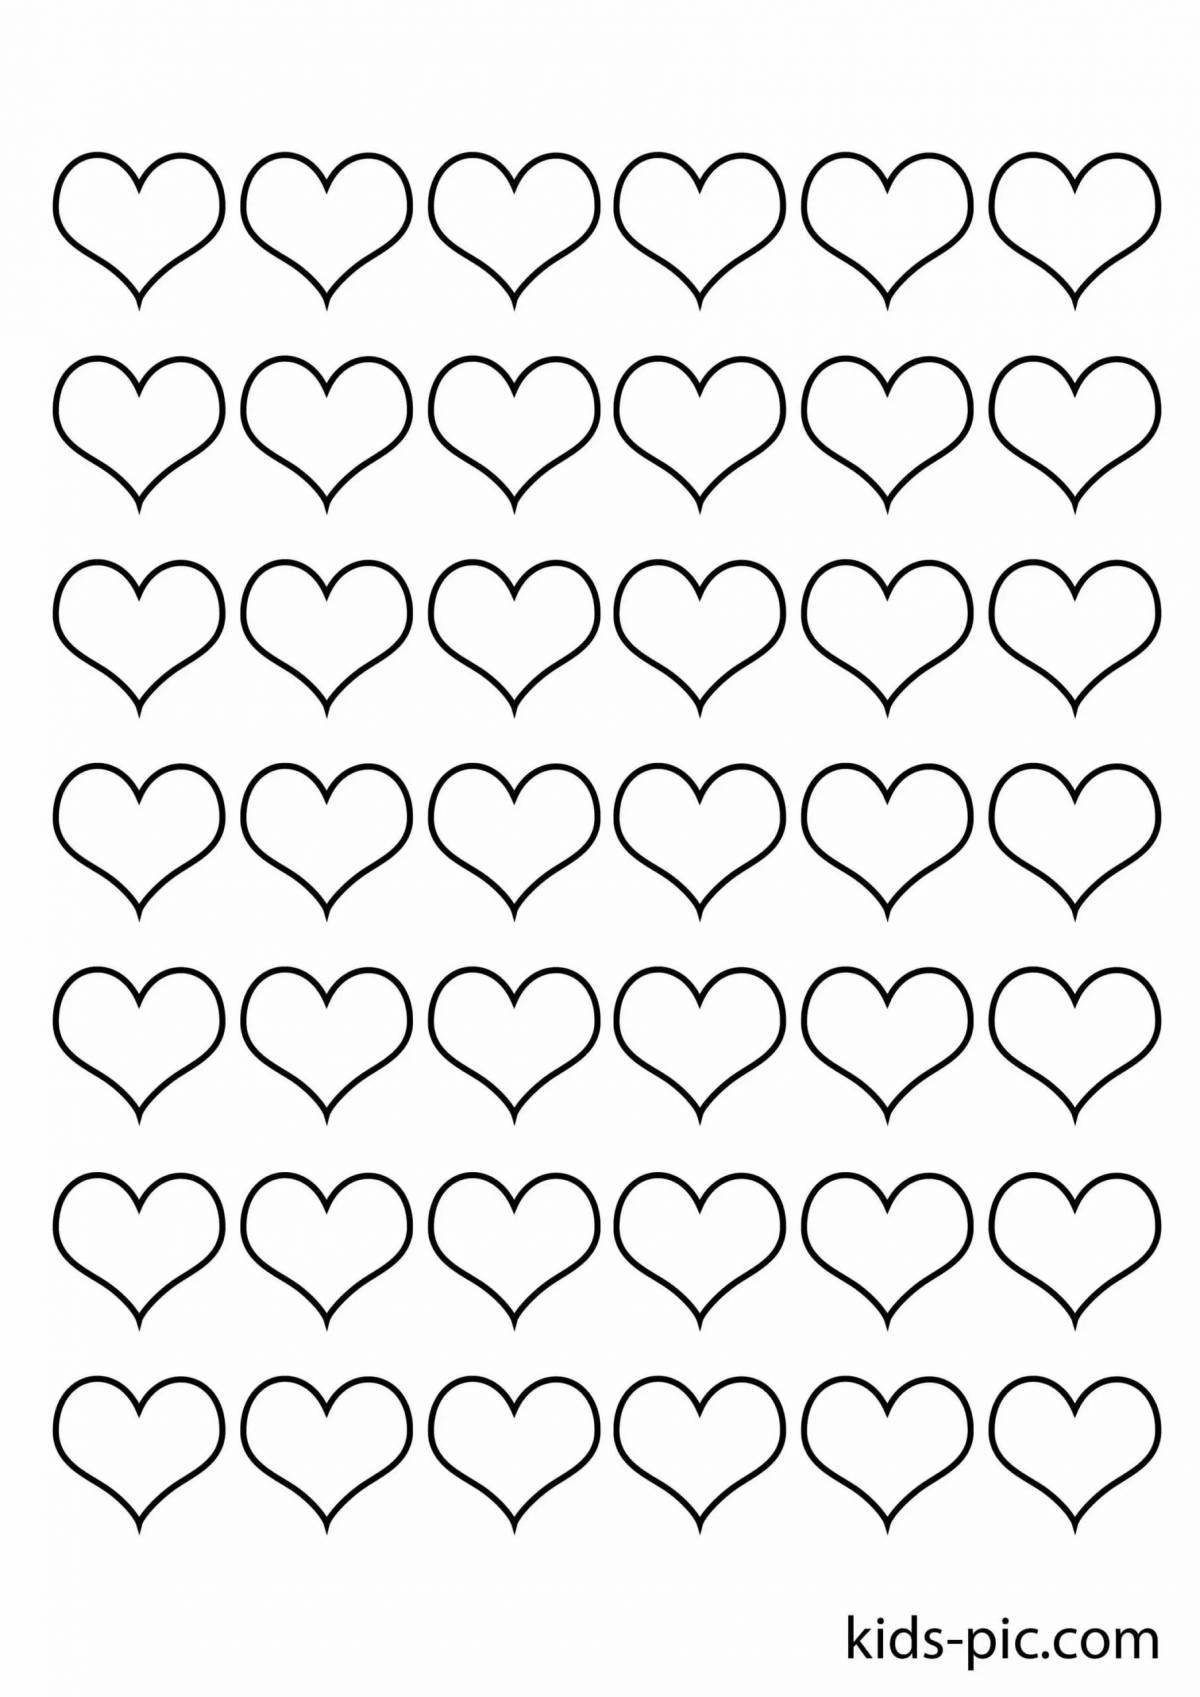 Colorful coloring page with hearts